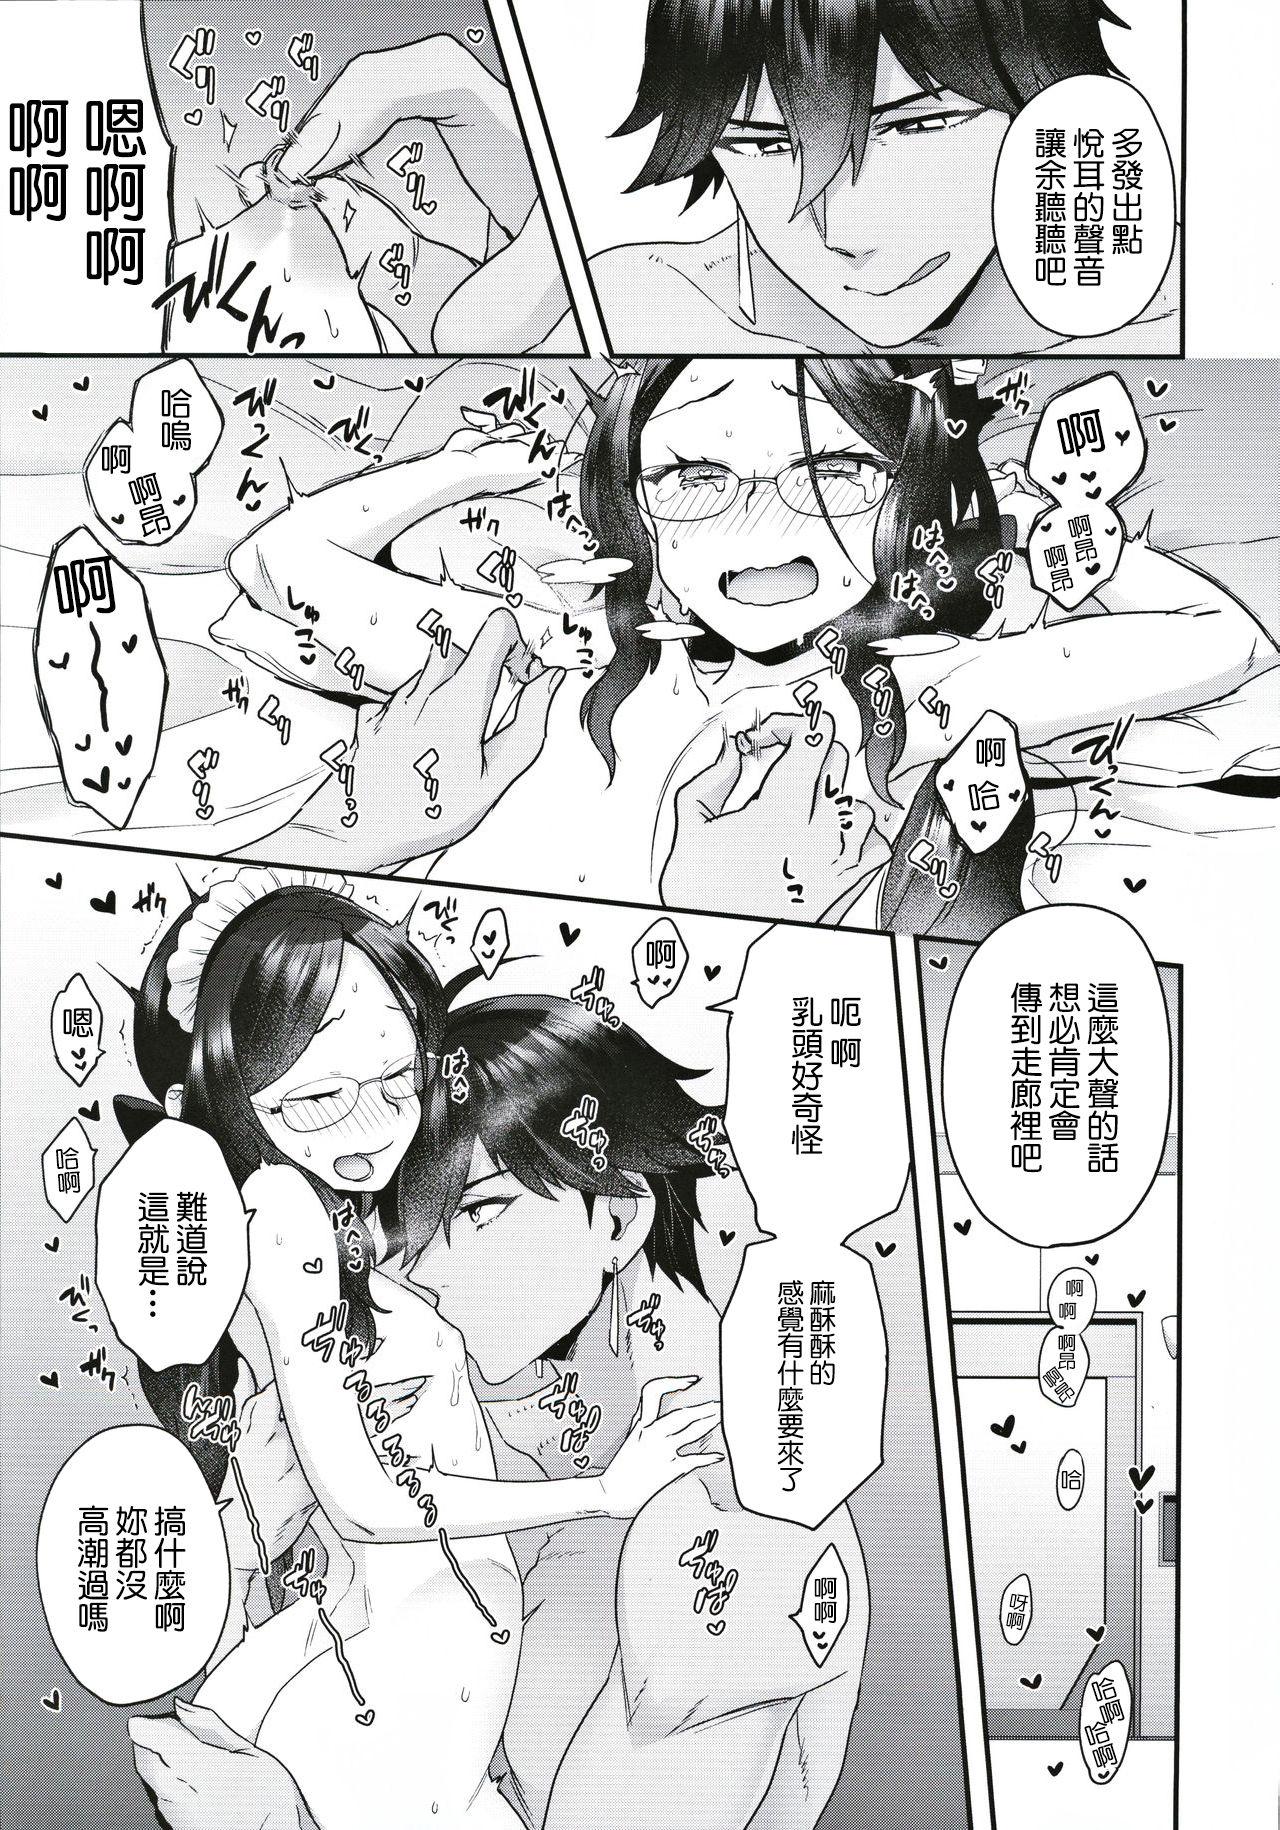 Her Taiyouou to no Kankei - Fate grand order Real Amateurs - Page 8